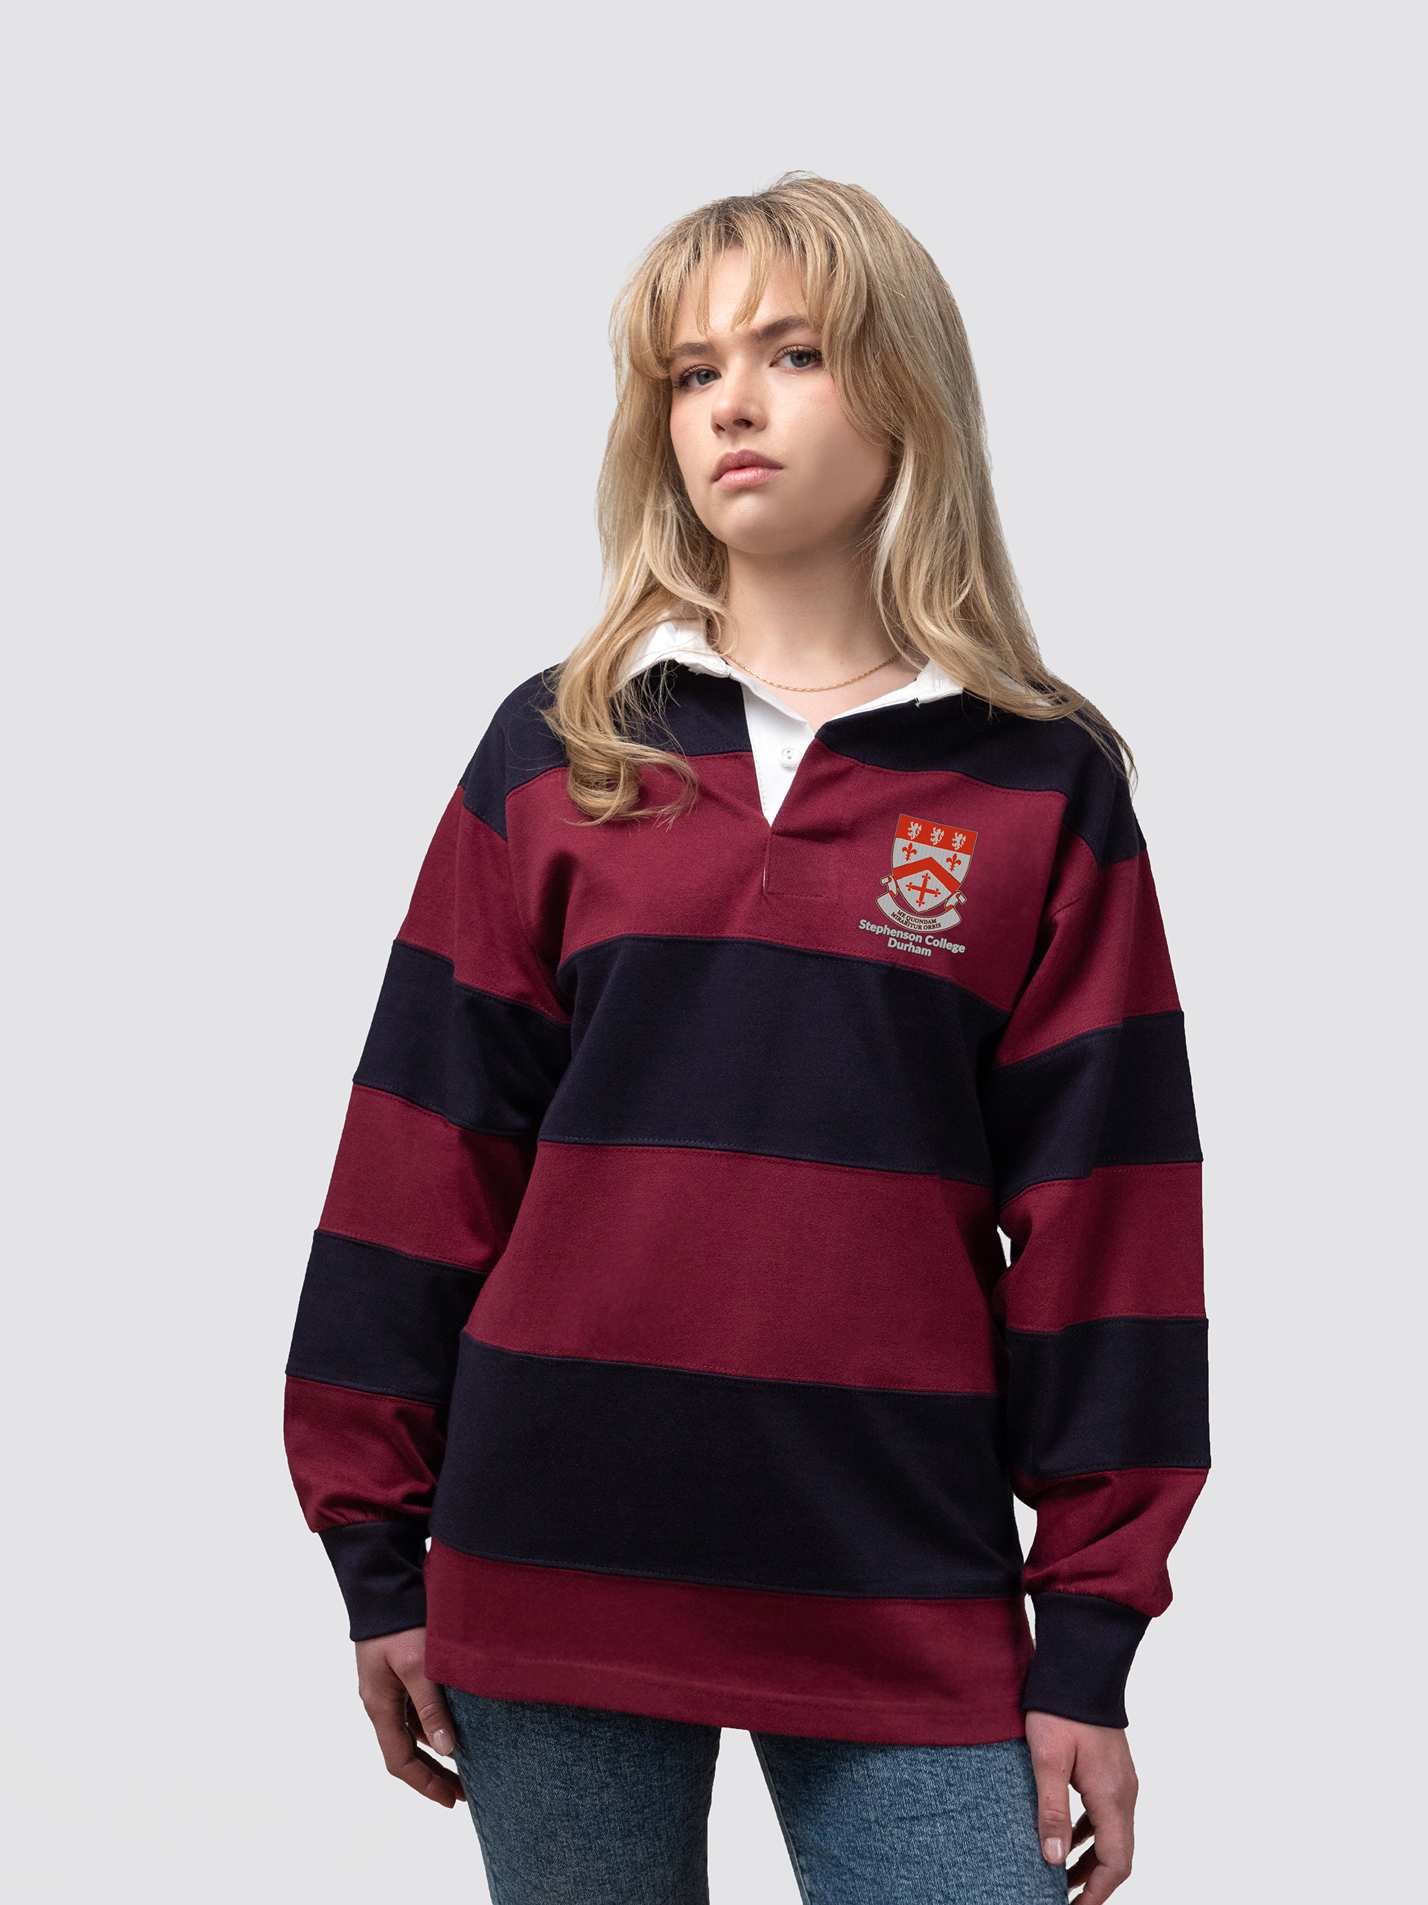 Stephenson College rugby shirt, with burgundy and navy stripes